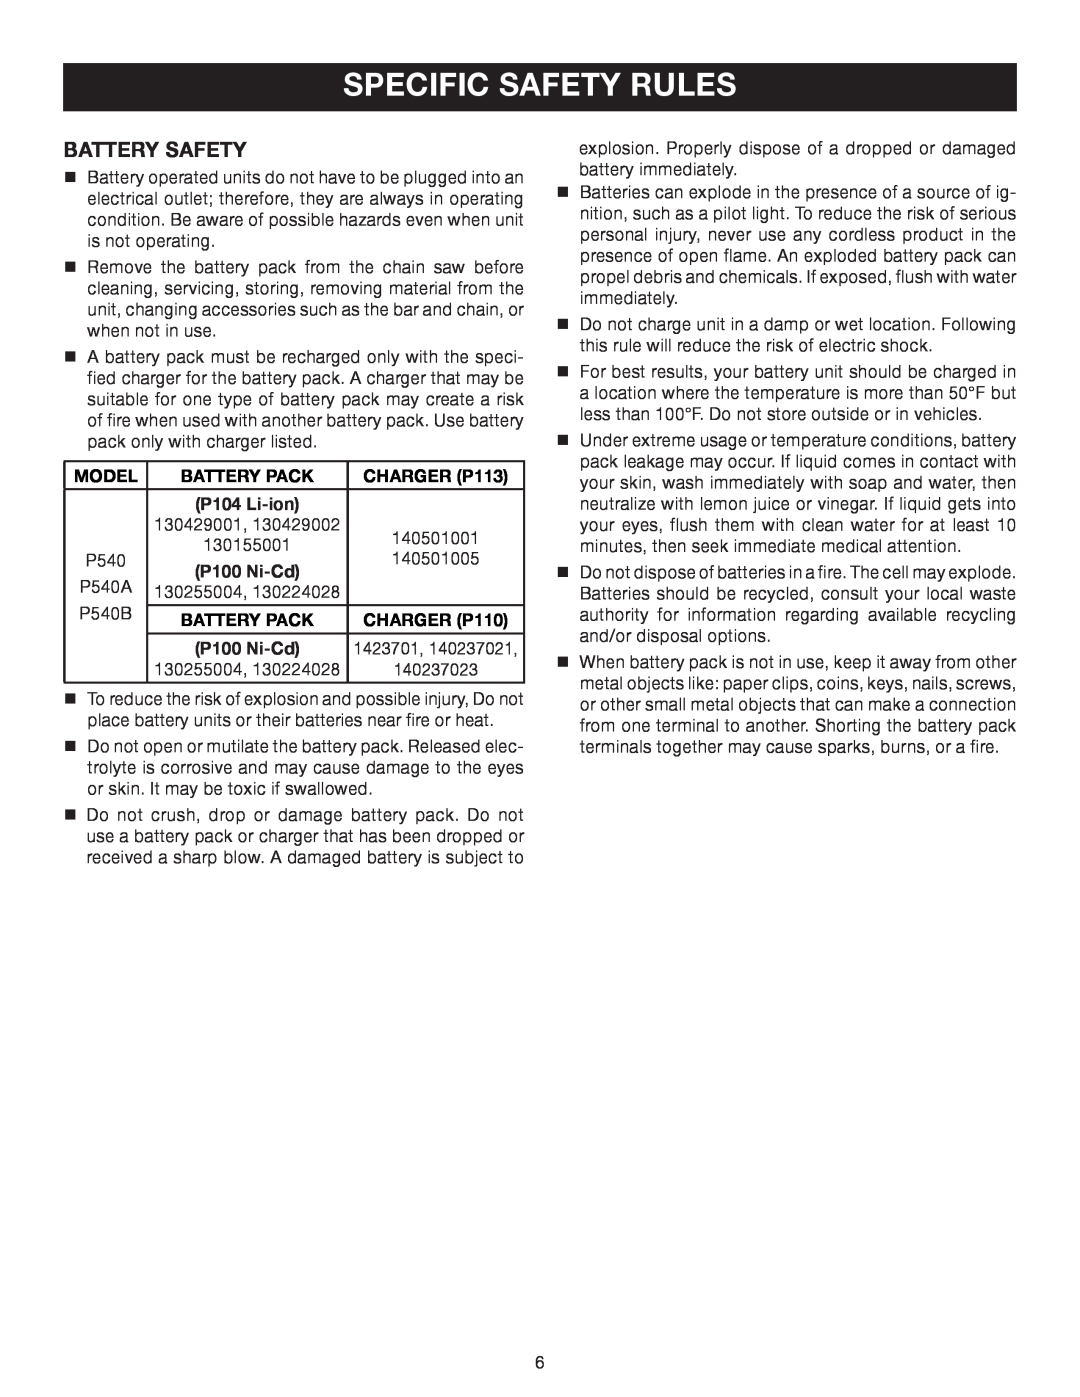 Ryobi P540B manual Specific Safety Rules, Battery Safety 